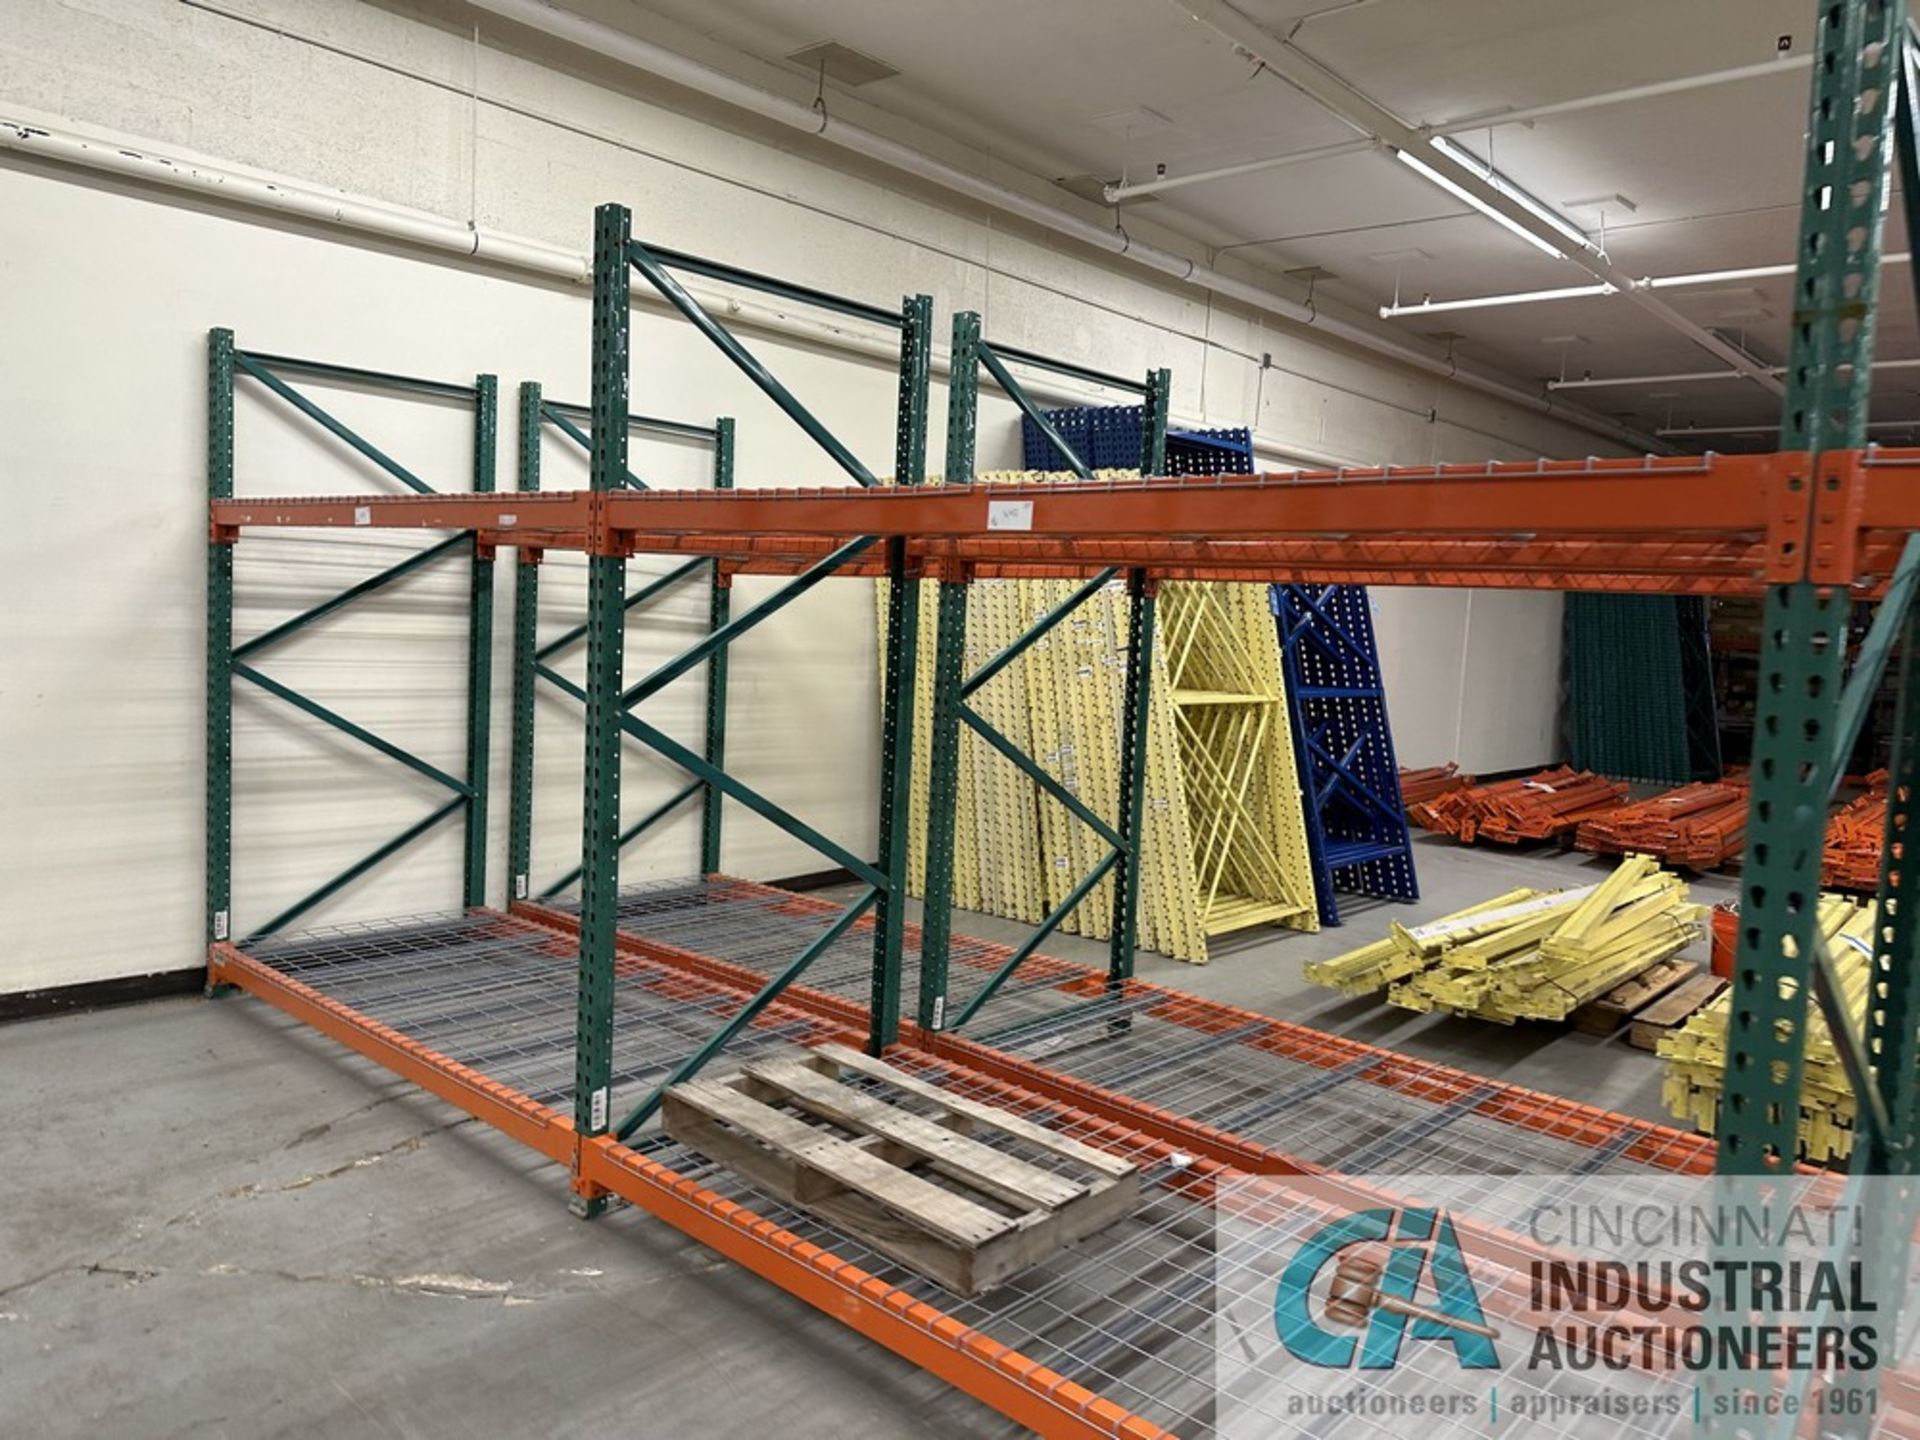 (LOT) (8) SECTIONS 96" X 42" X 96" AND (2) SECTIONS 72" X 42" X 96" ADJUSTABLE BEAM PALLET RACK - Image 7 of 8